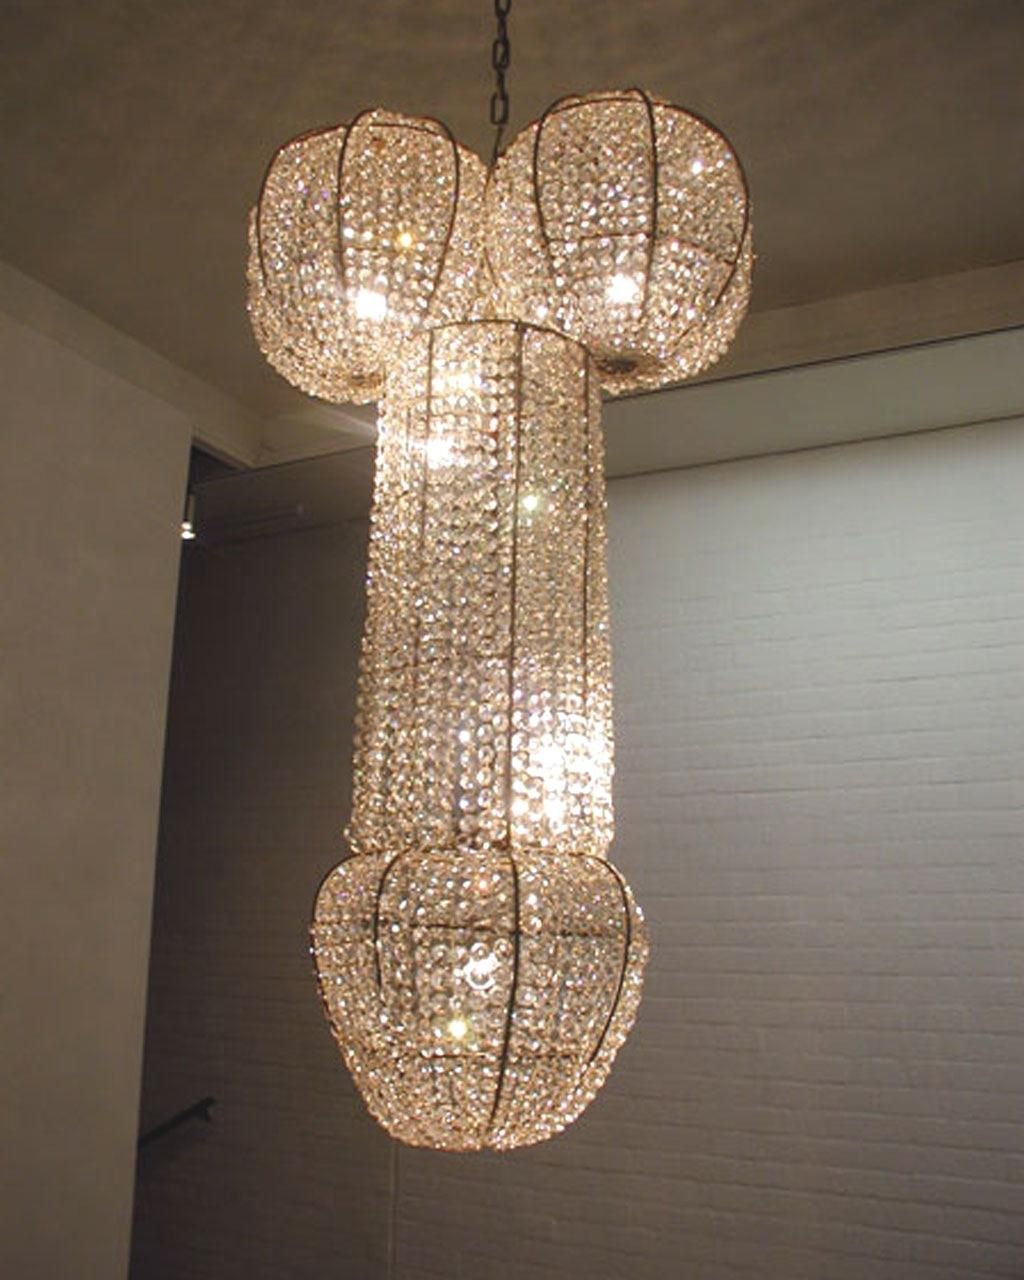 097cec9d-nothing-like-a-well-hung-chandelier.jpg